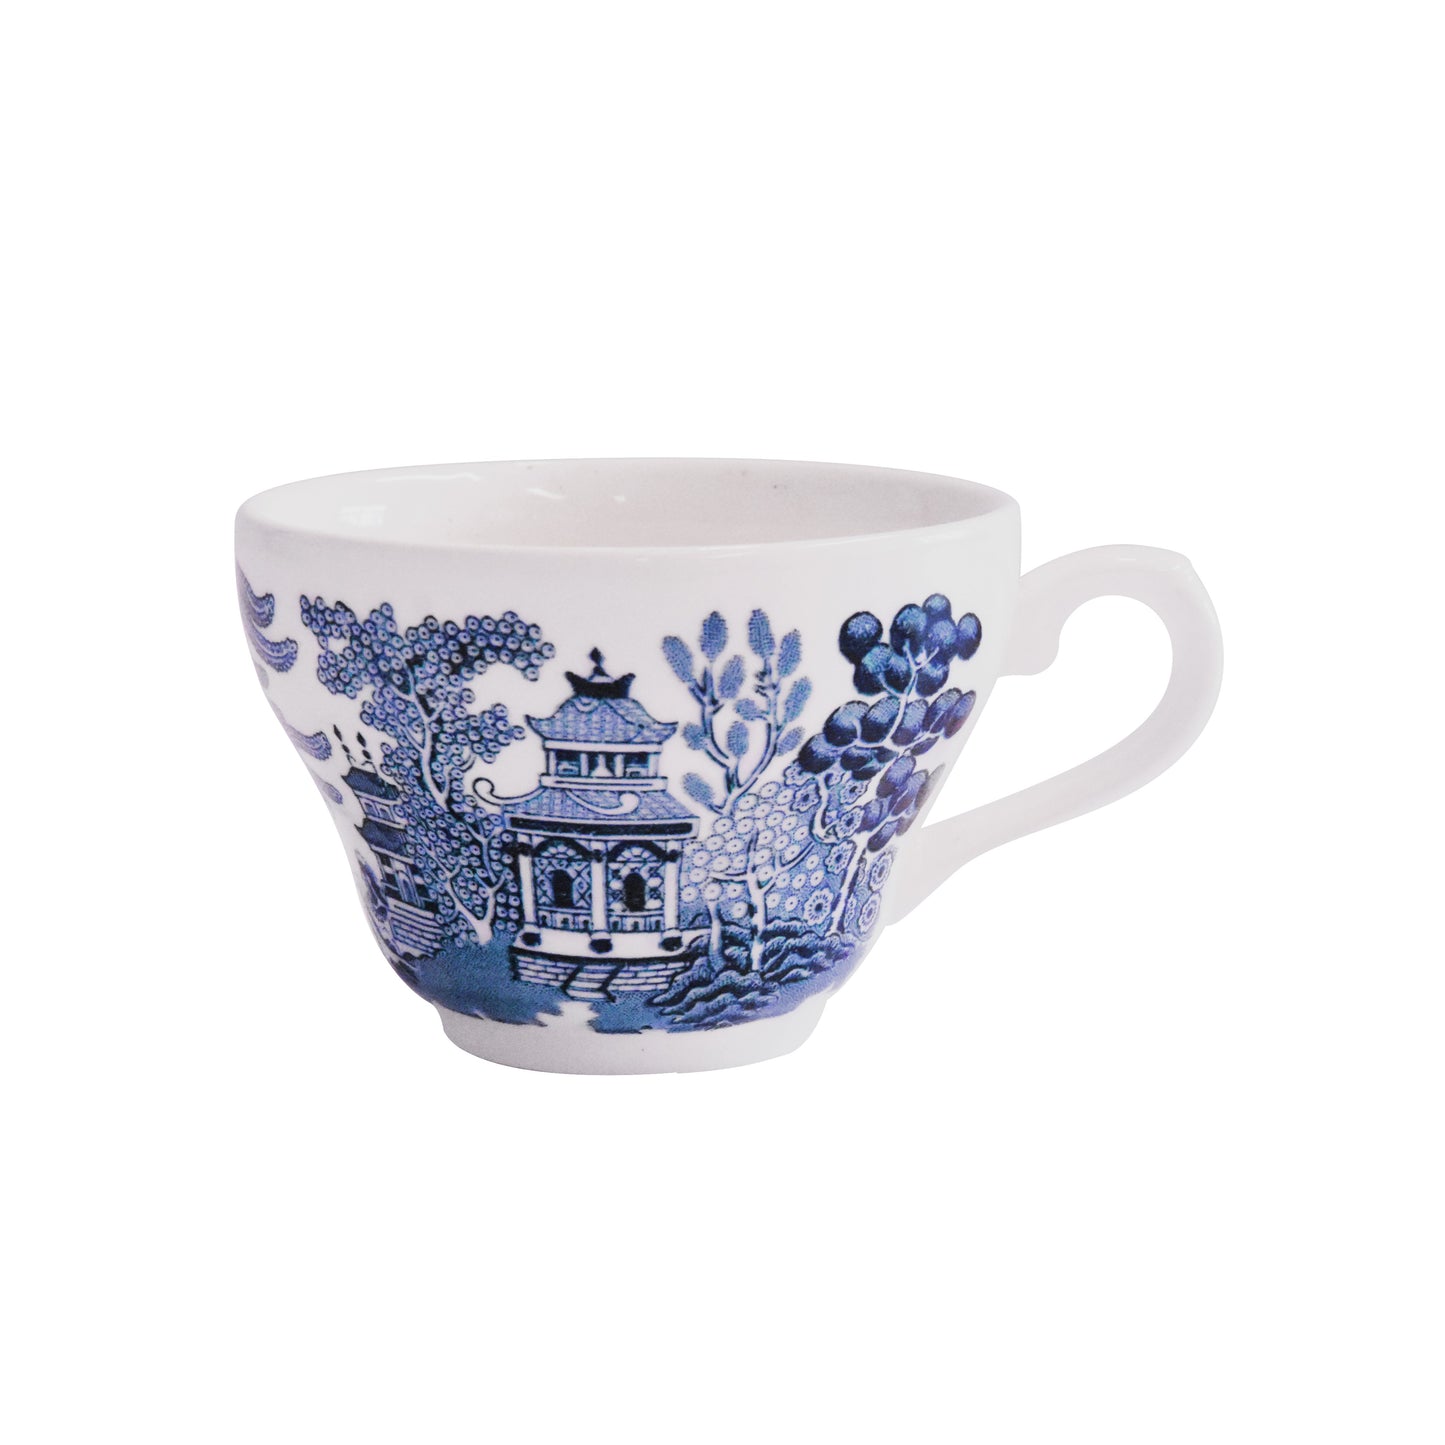 Queen's by Churchill Blue Willow Teacup